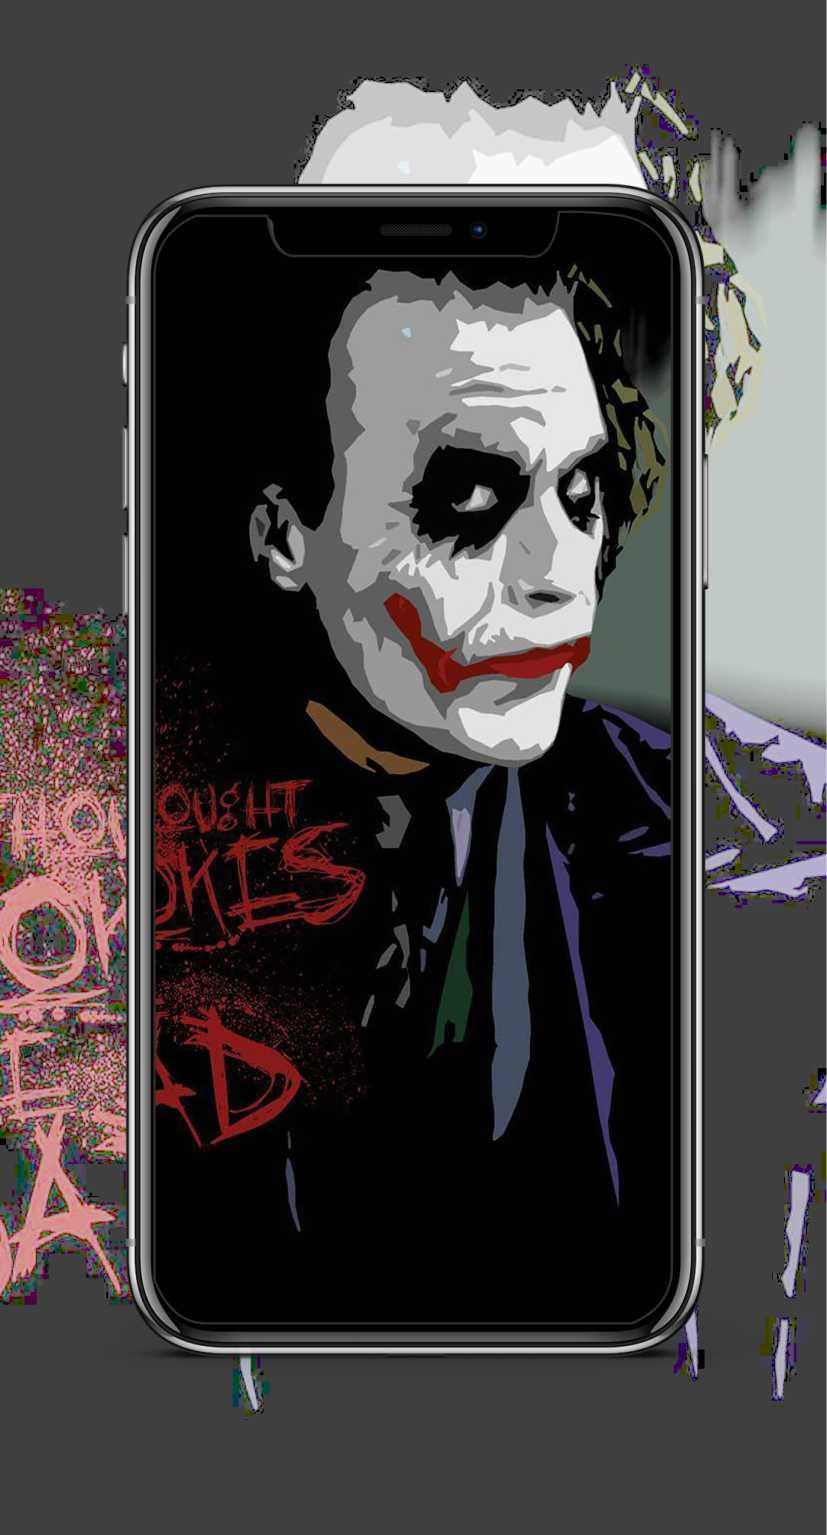 New Hd Wallpapers Joker 4k 2019 For Android Apk Download